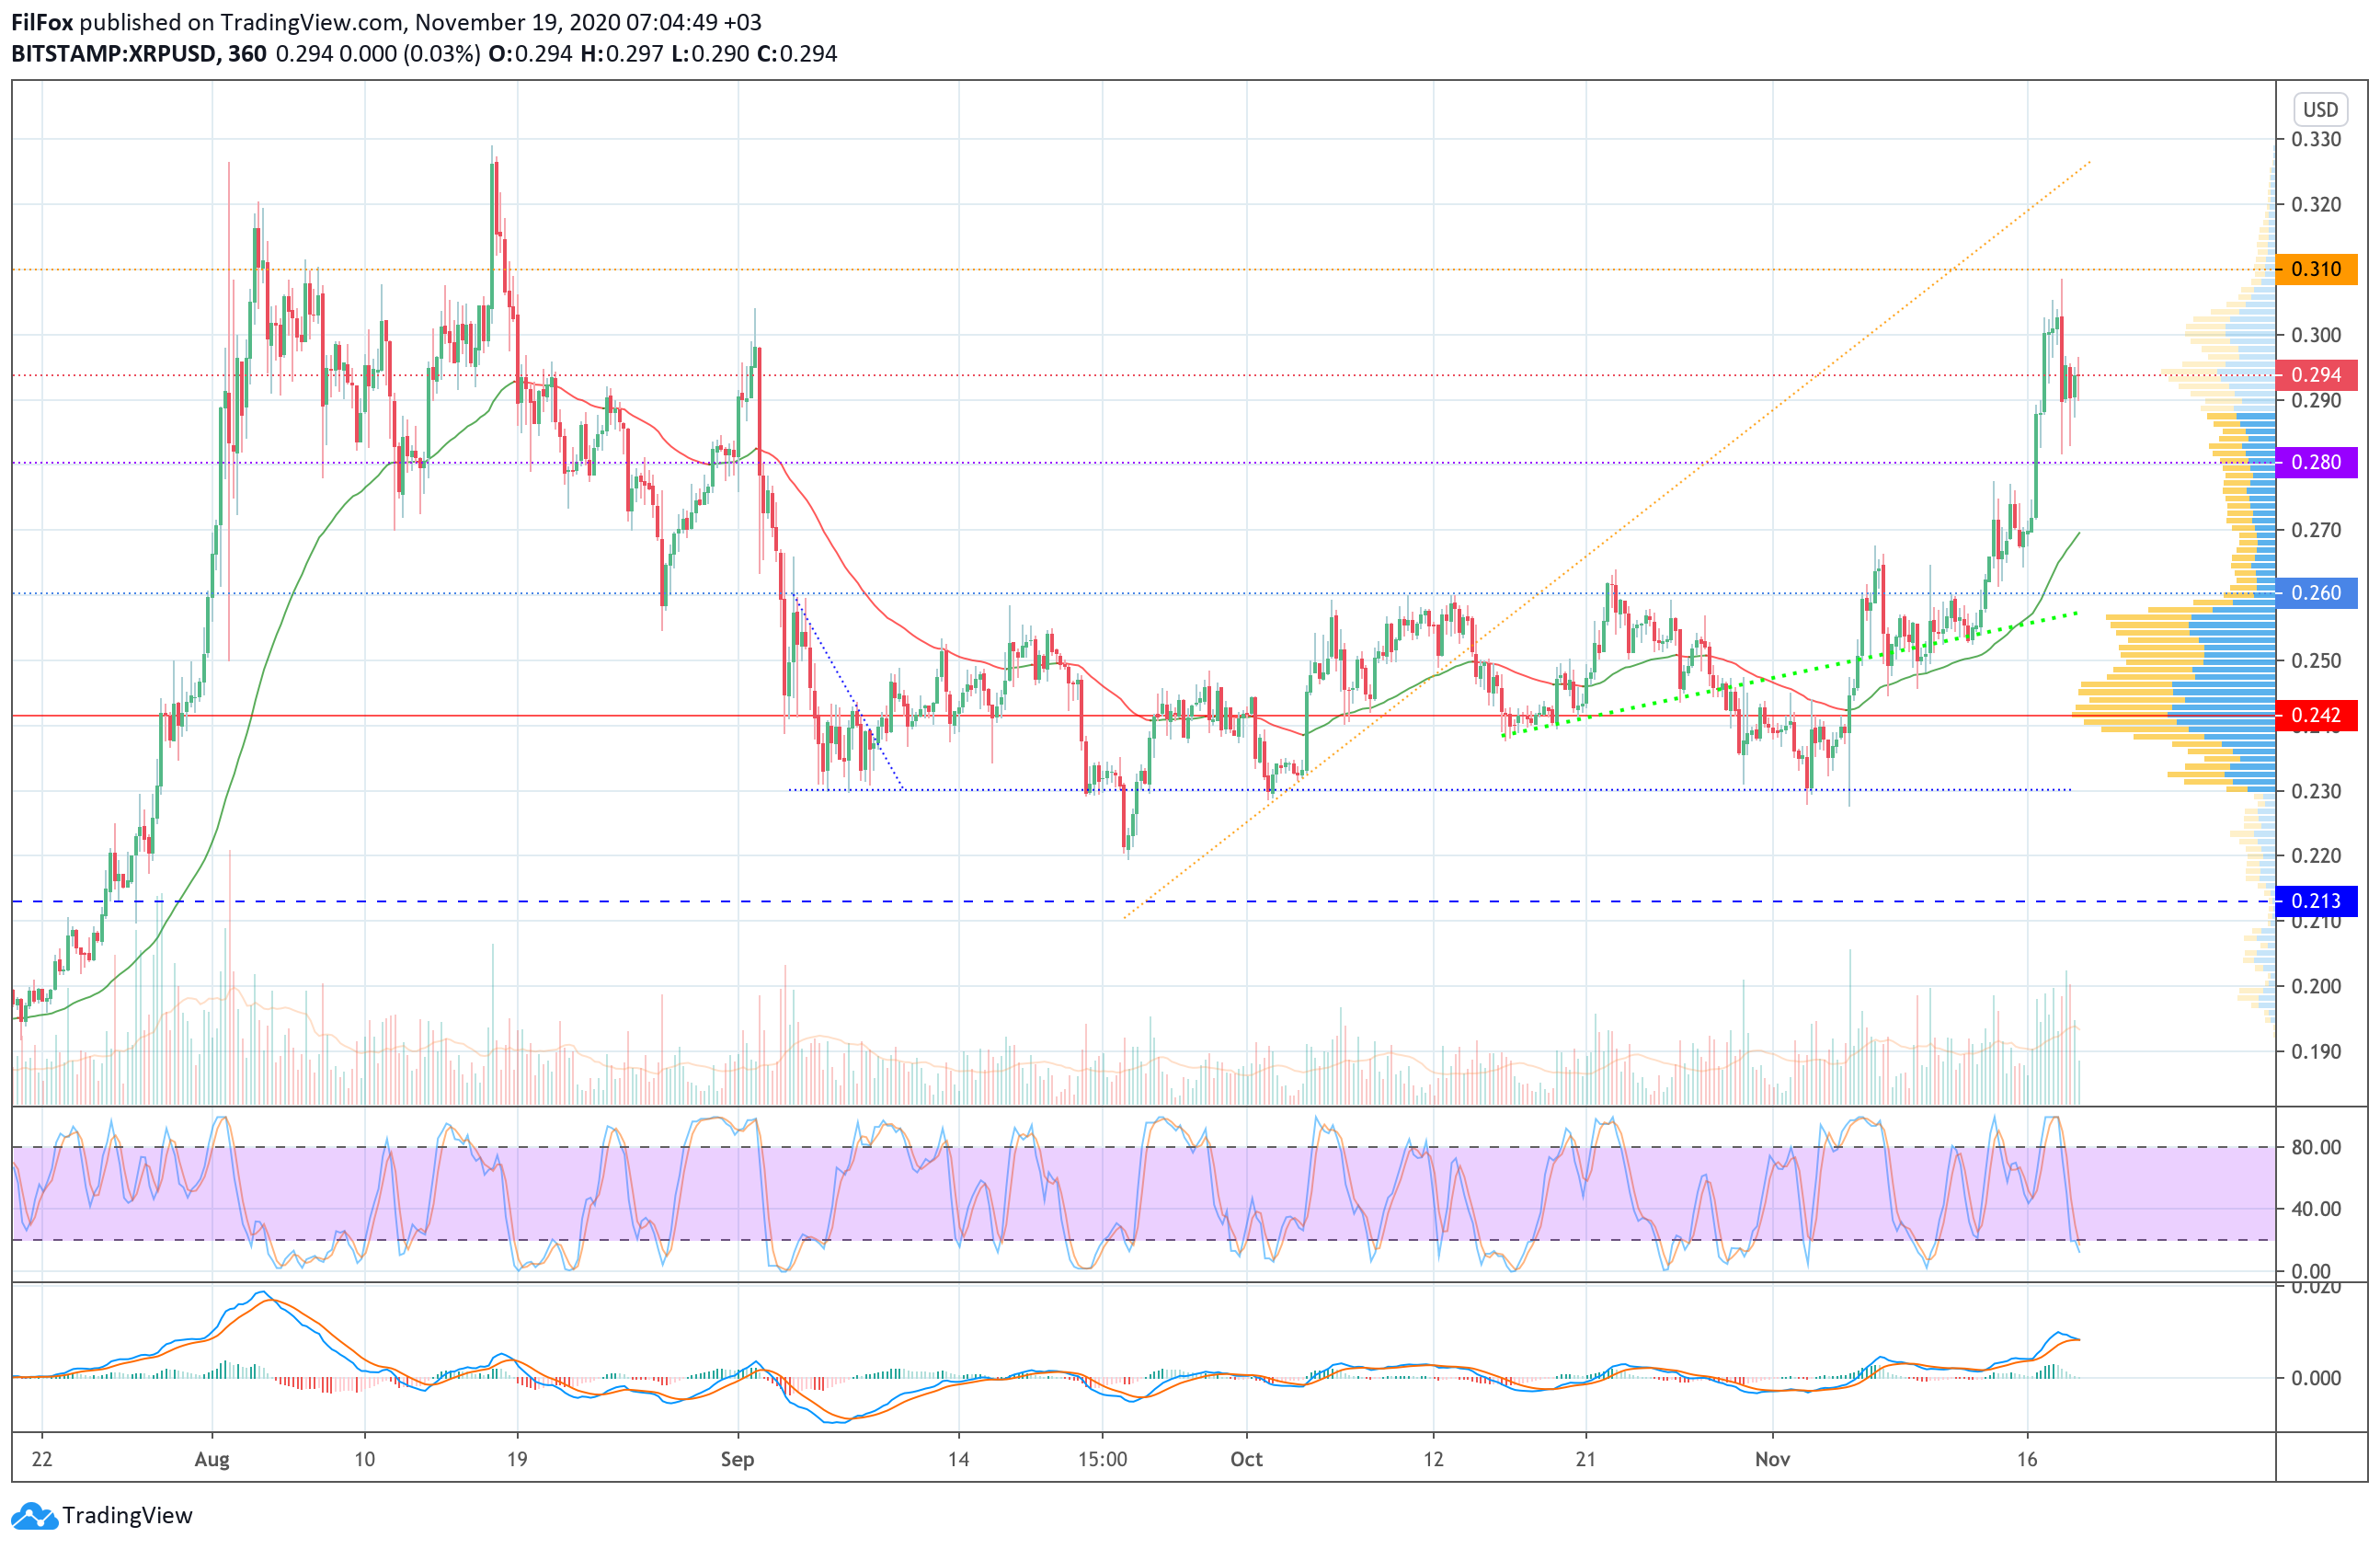 Analysis of the prices of Bitcoin, Ethereum, Ripple for 11/19/2020